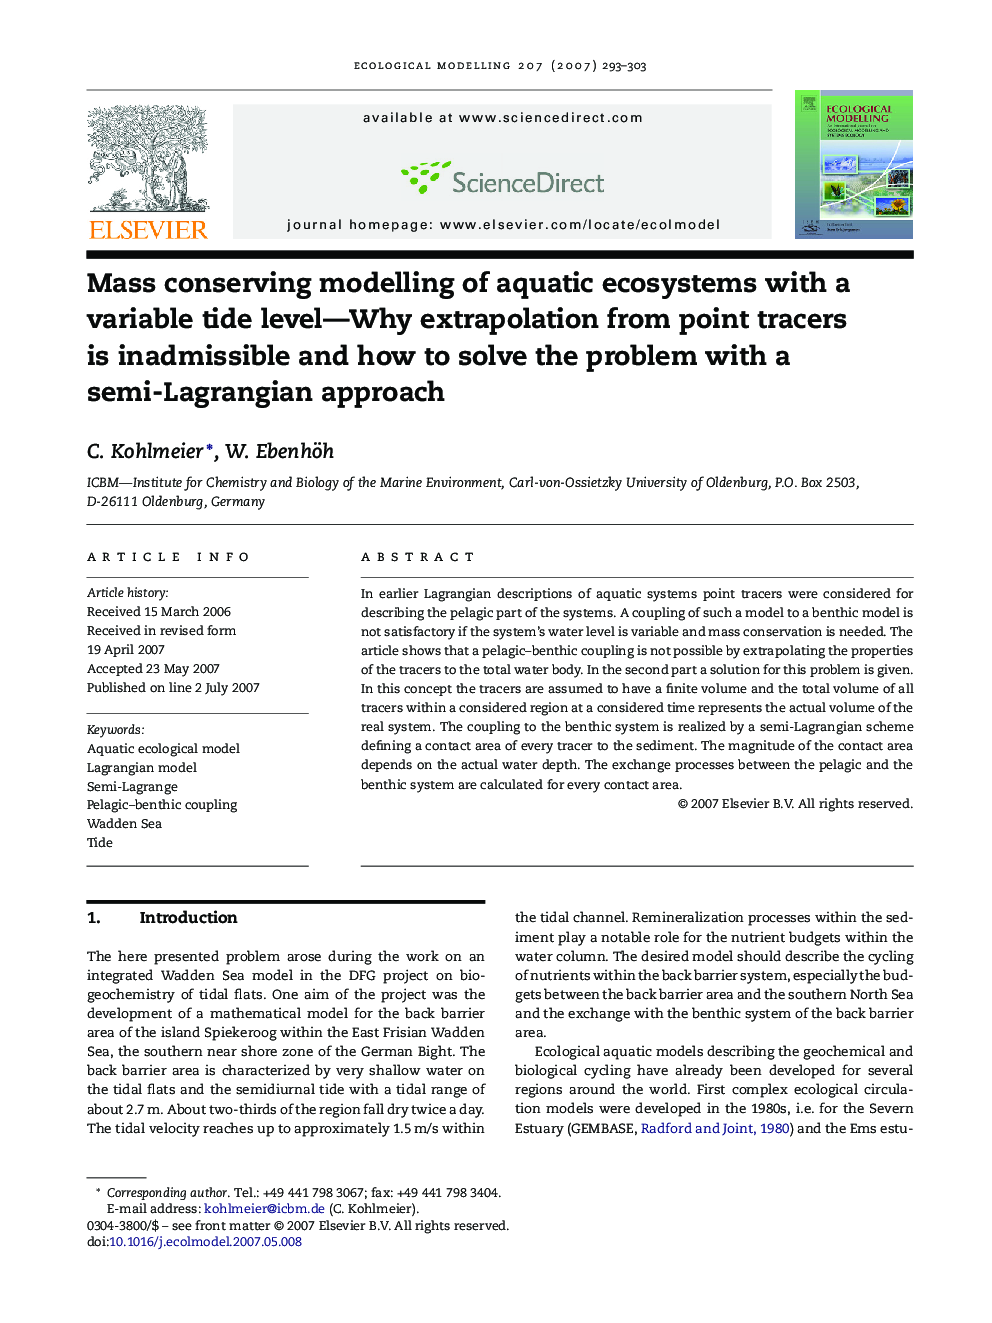 Mass conserving modelling of aquatic ecosystems with a variable tide level—Why extrapolation from point tracers is inadmissible and how to solve the problem with a semi-Lagrangian approach